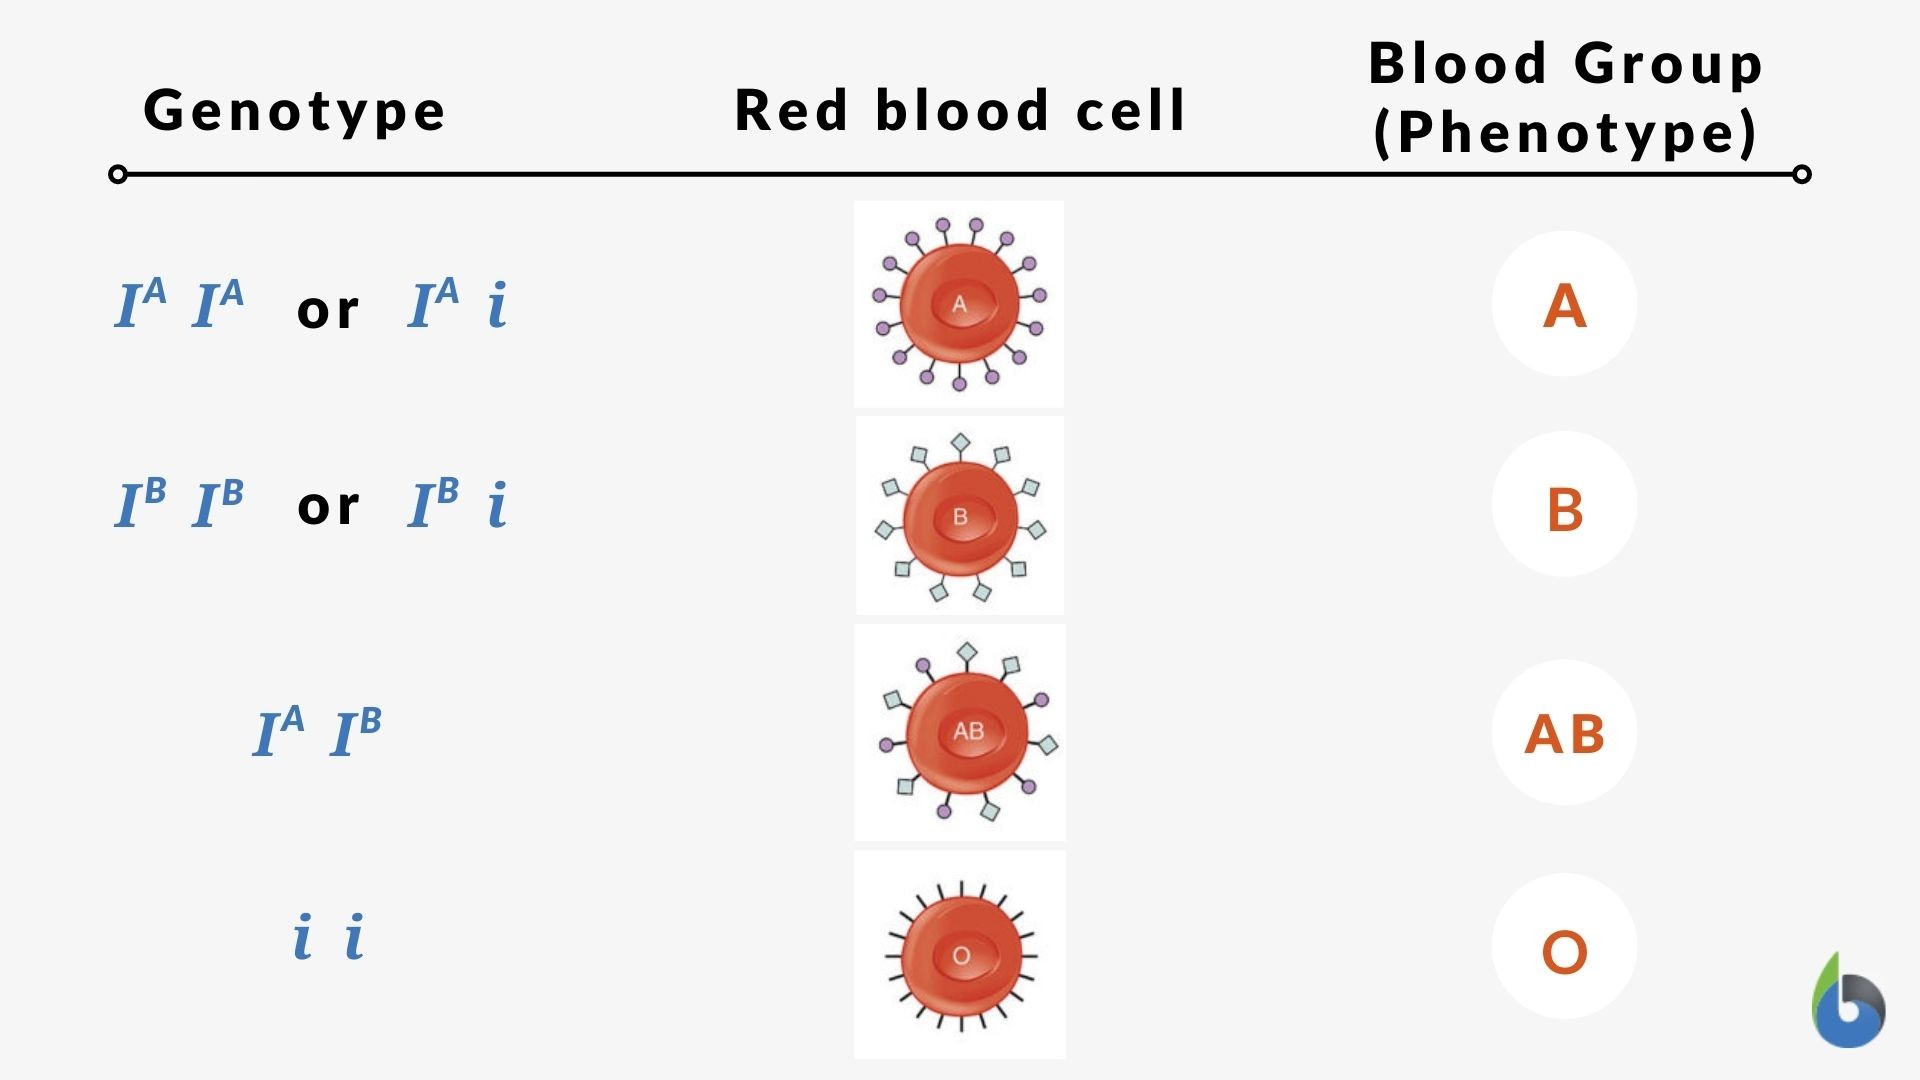 Expression of alleles resulting in different blood groups.